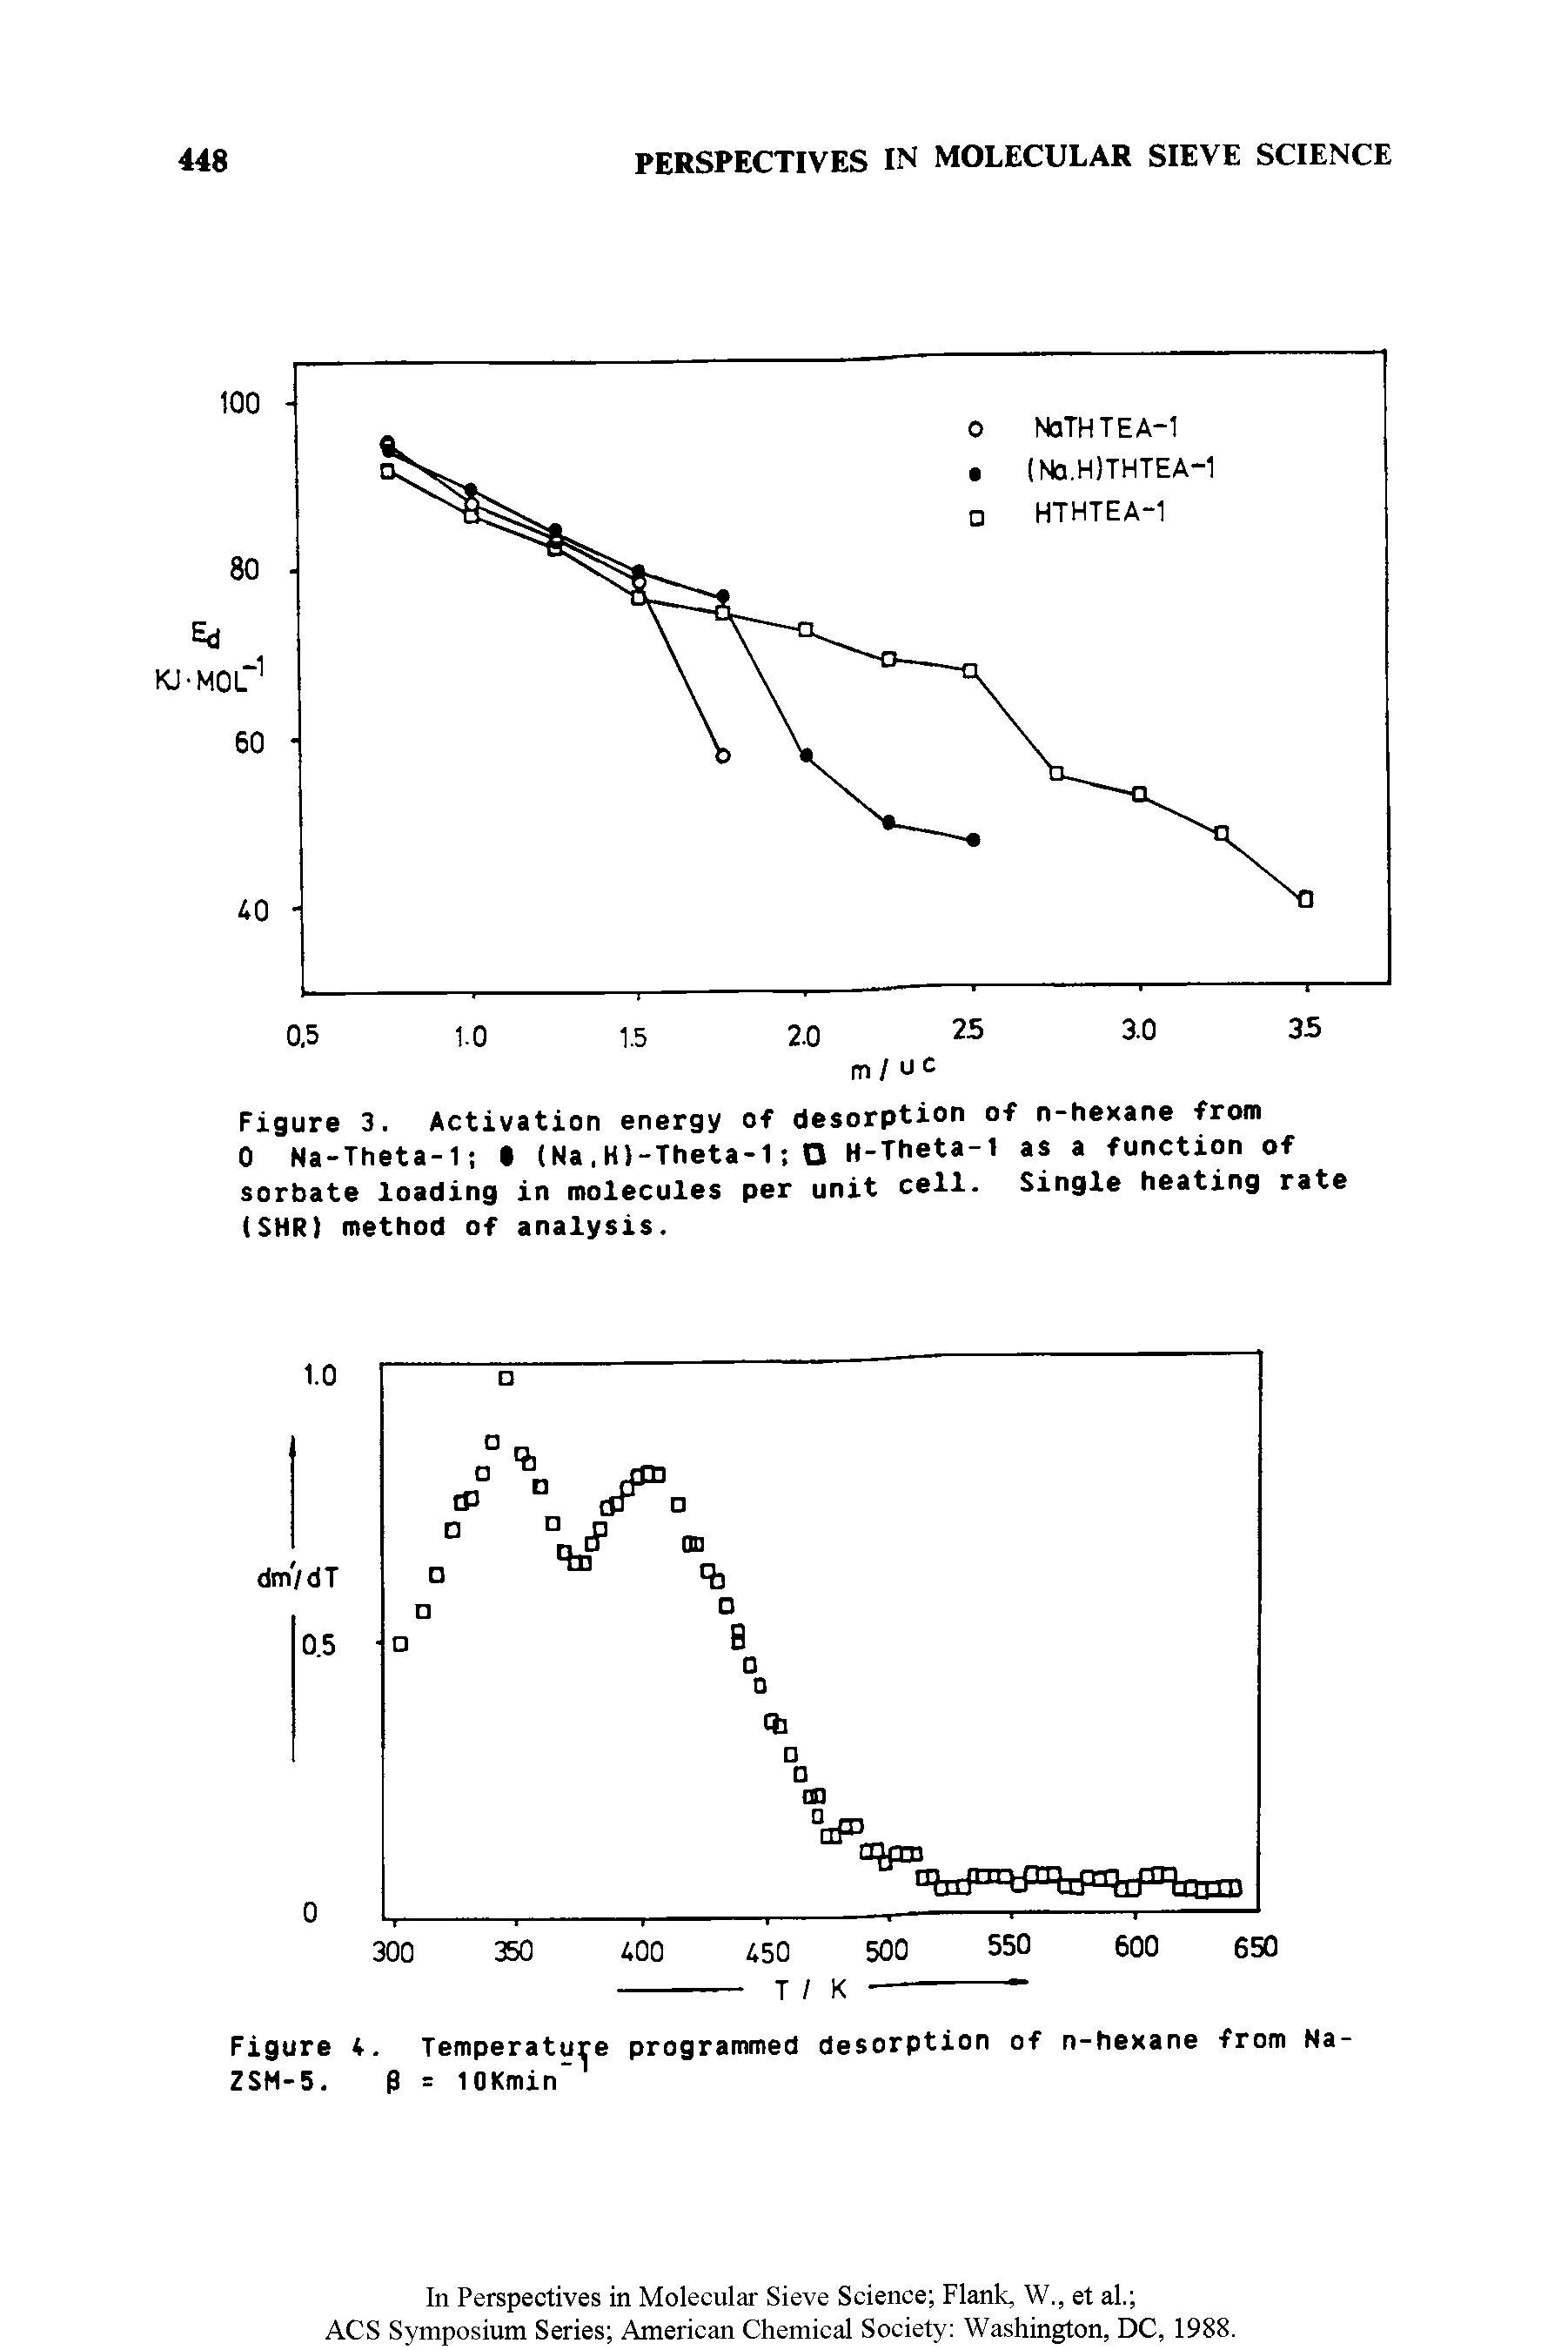 Figure 3. Activation energy of desorption of n-hexane from 0 Na-Theta-1 (Na,H)-Theta-1 O H-Theta-1 as a function of sorbate loading in molecules per unit cell. Single heating rate tSHR) method of analysis.